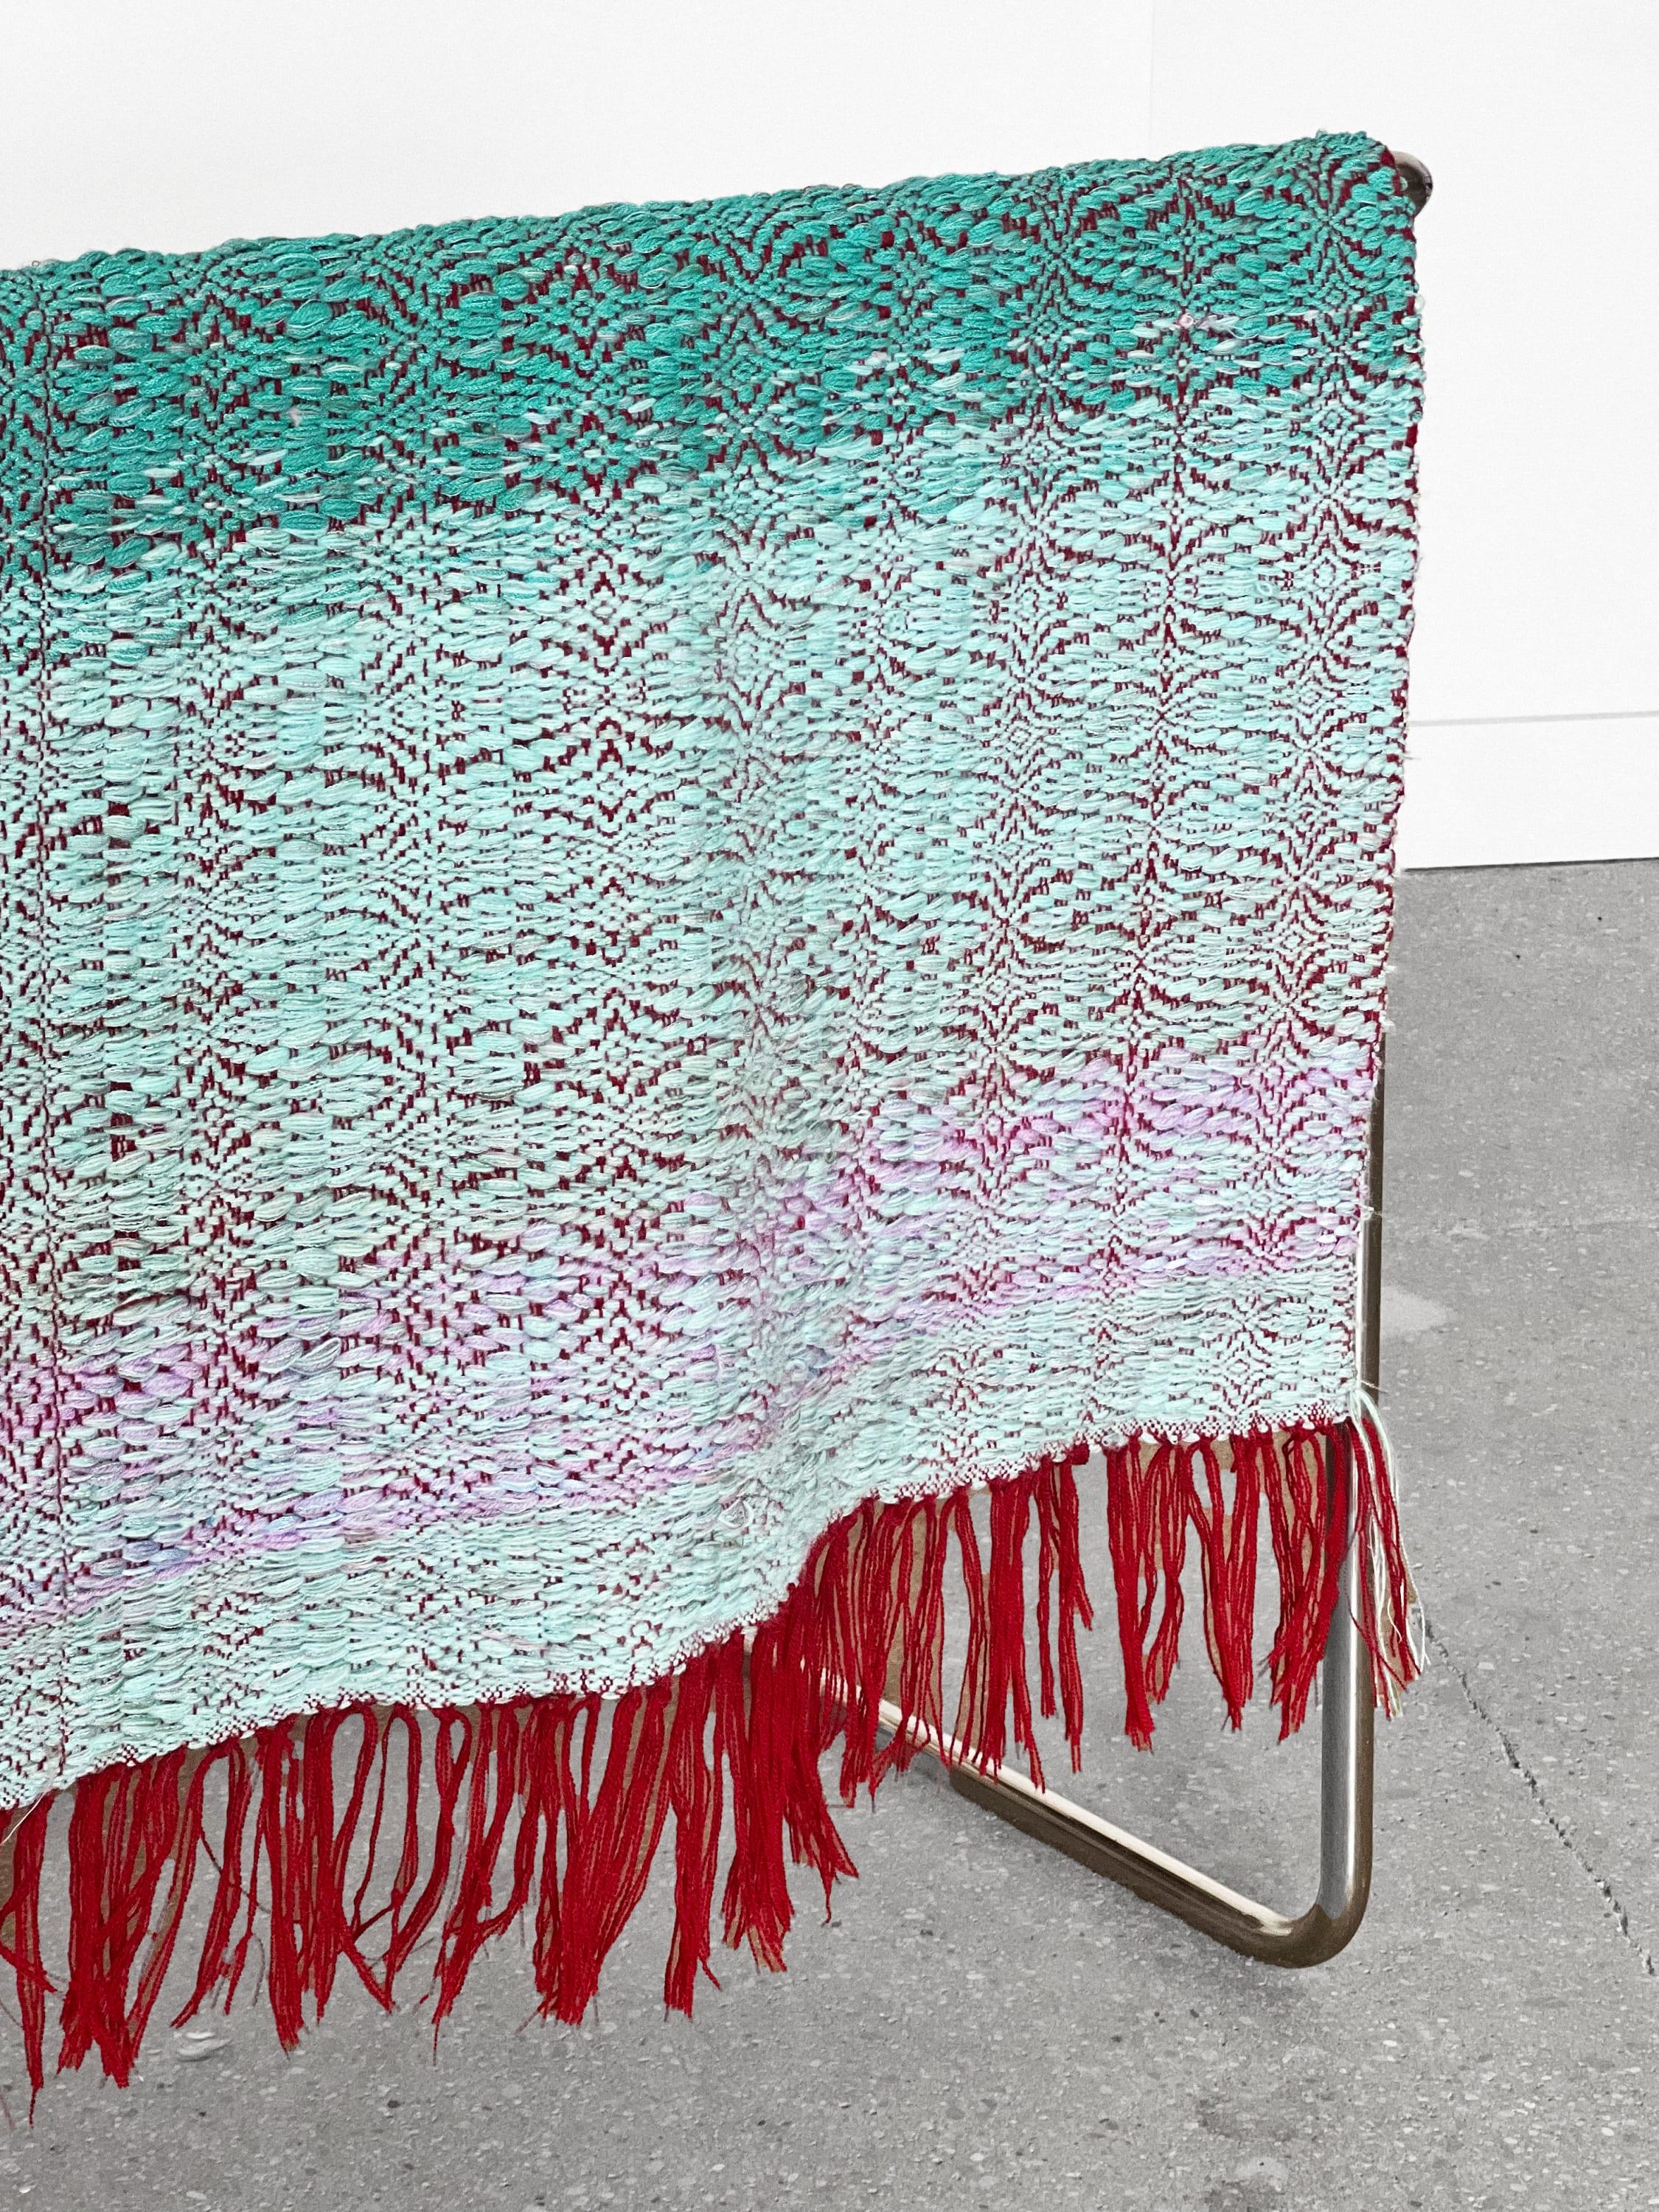 Handwoven throw/tapestry crafted with meticulous care from reclaimed fibers, cotton, and wool yarns. Soft and cozy throughout the piece and can be used functionally or aesthetically.

The intricate blend of textures and colors creates a visual